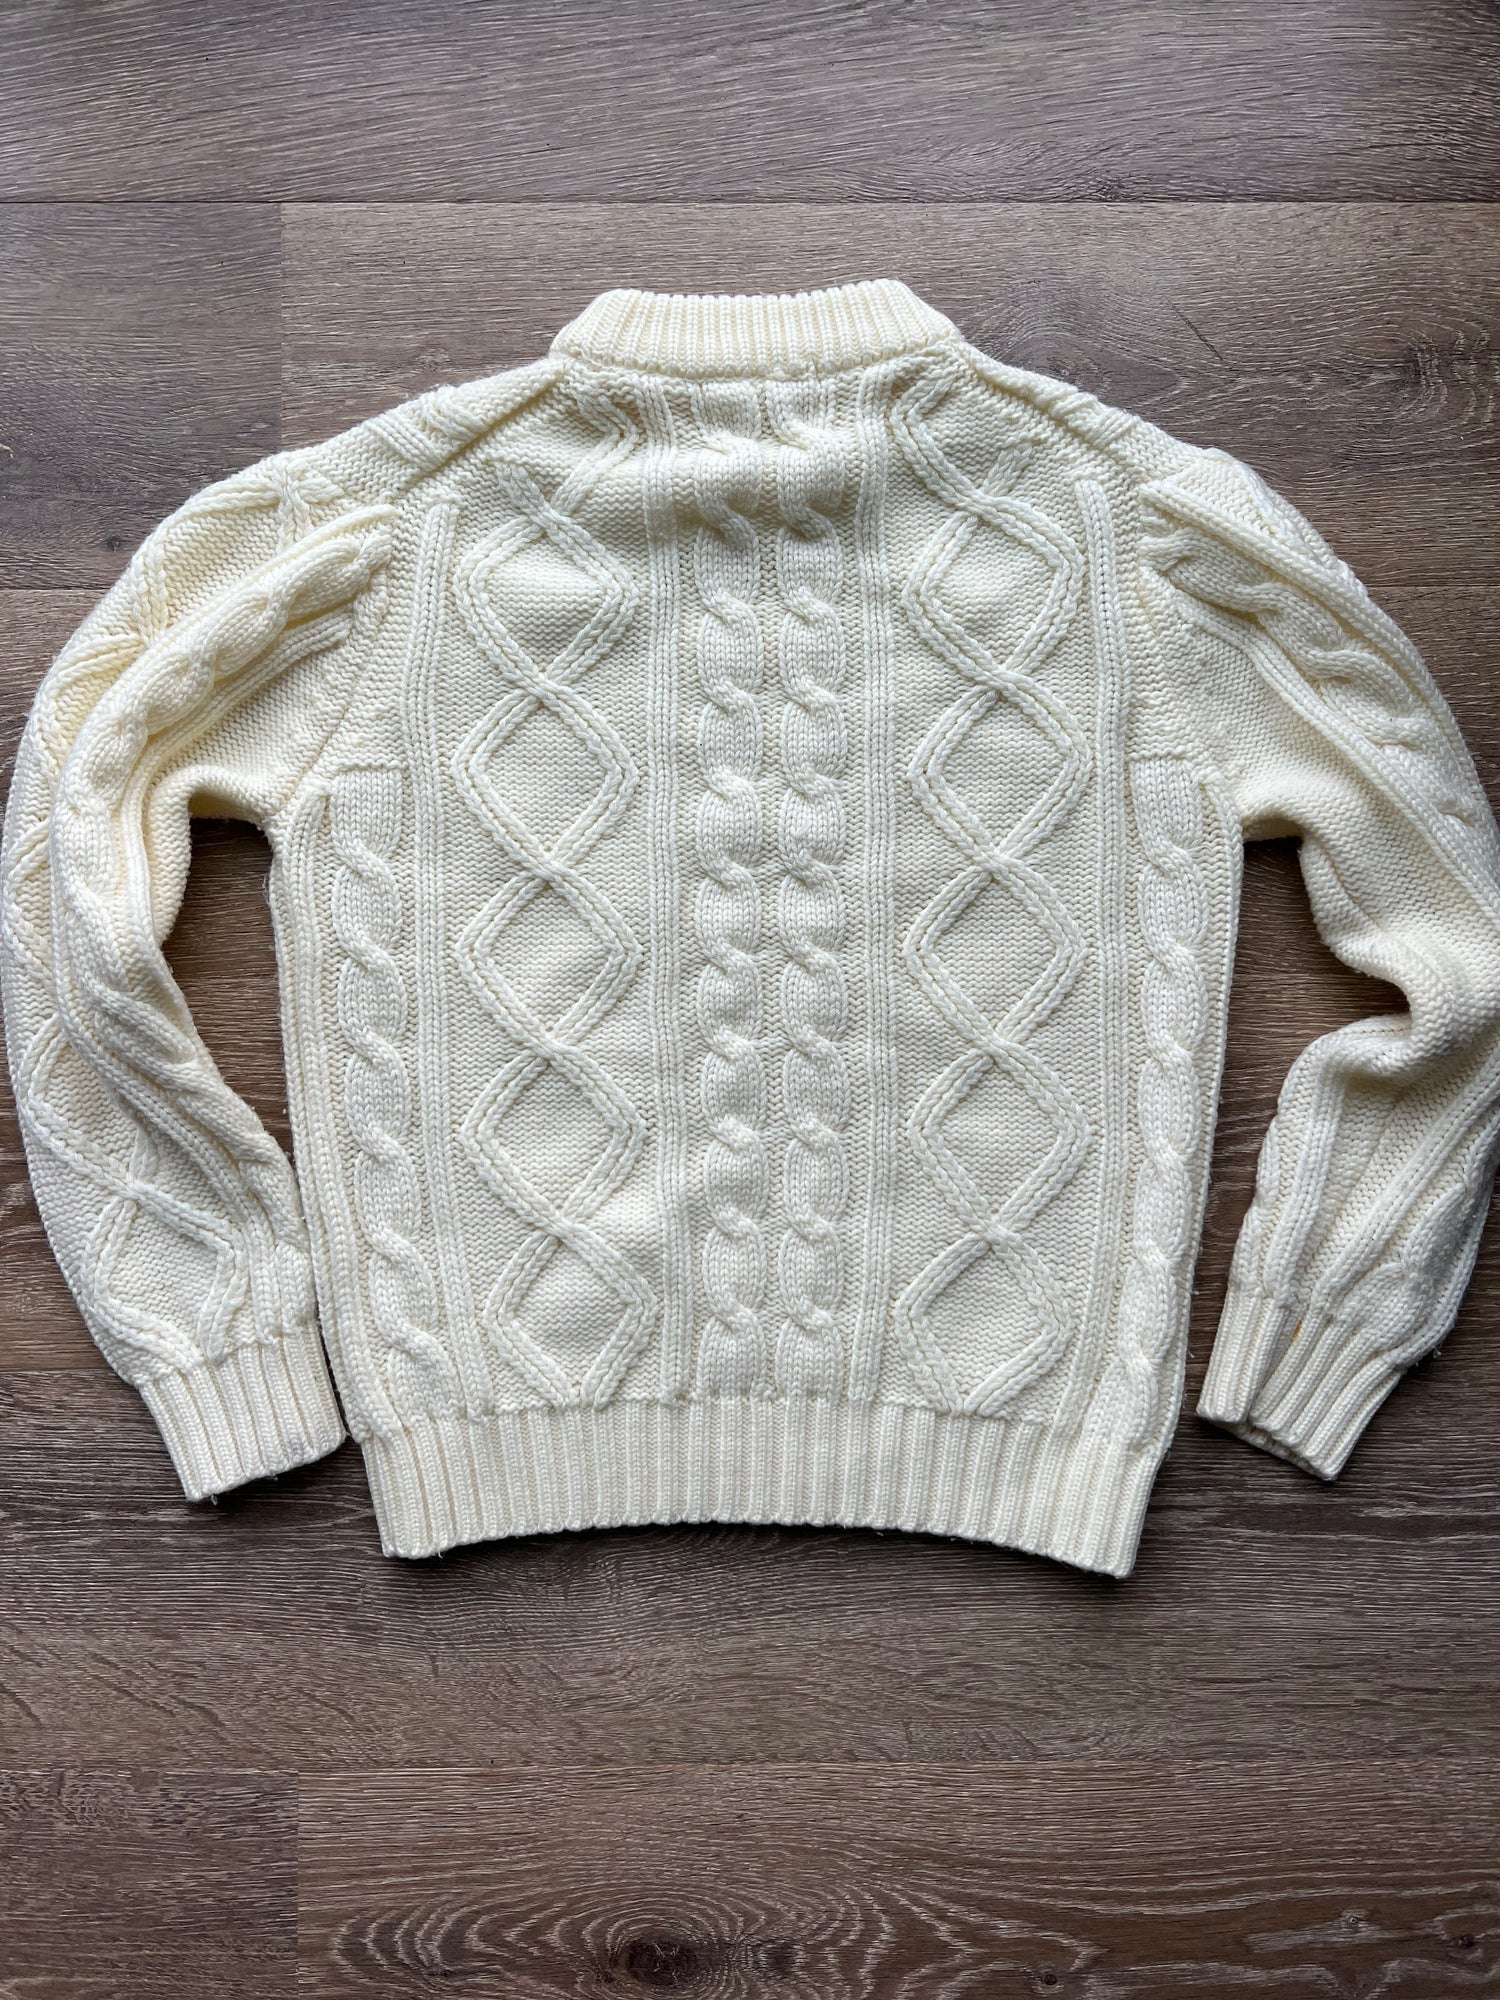 70s Sears Cable Knit Sweater S/M